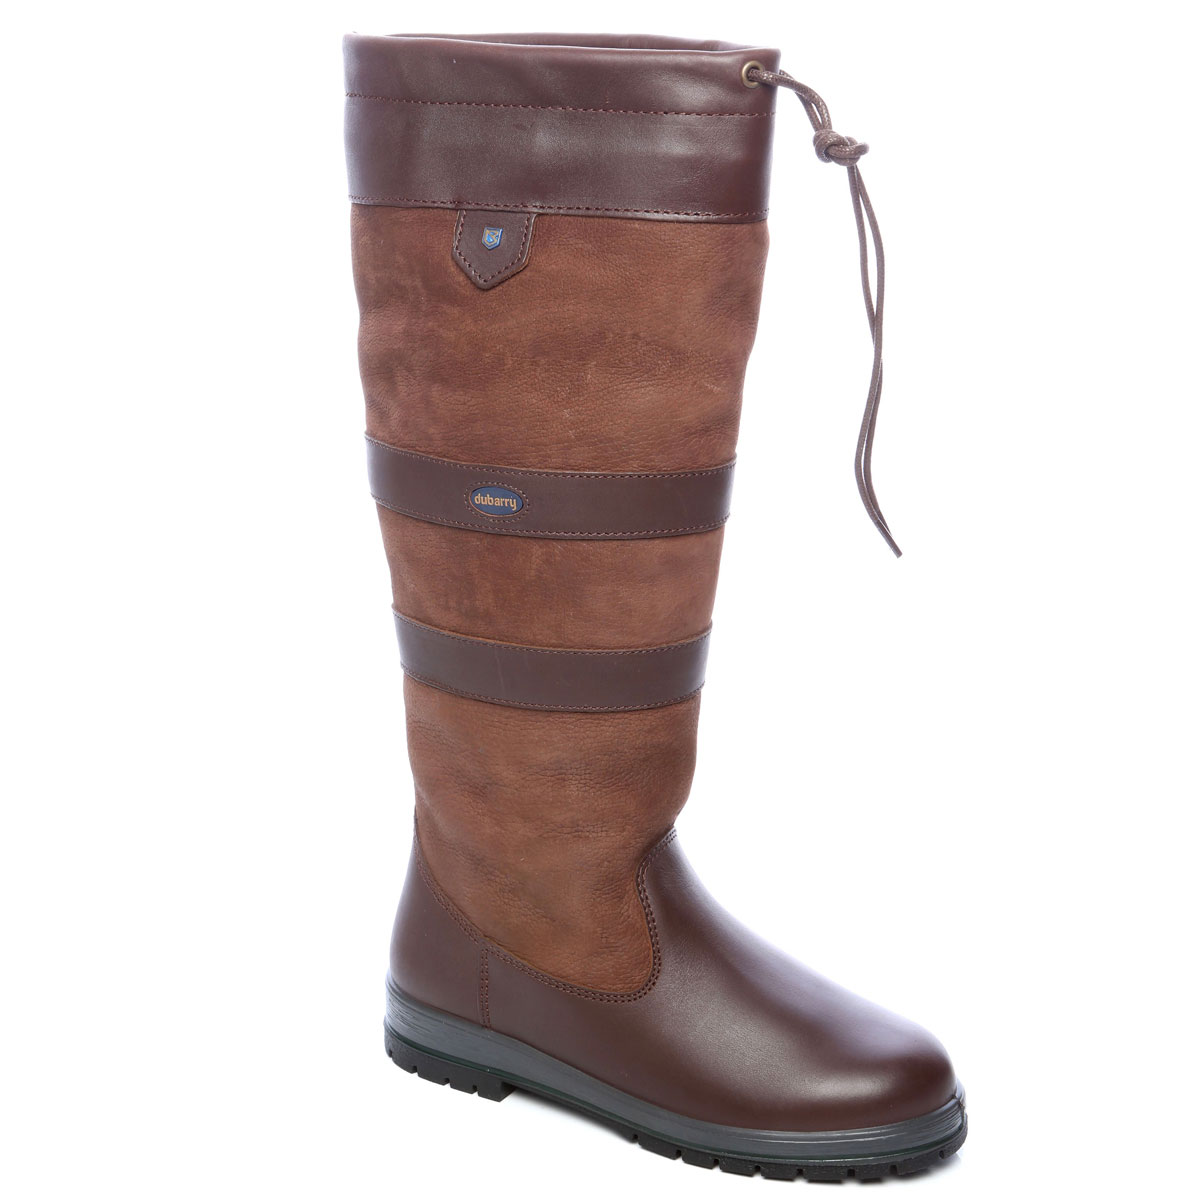 Dubarry Galway ExtraFit Boot